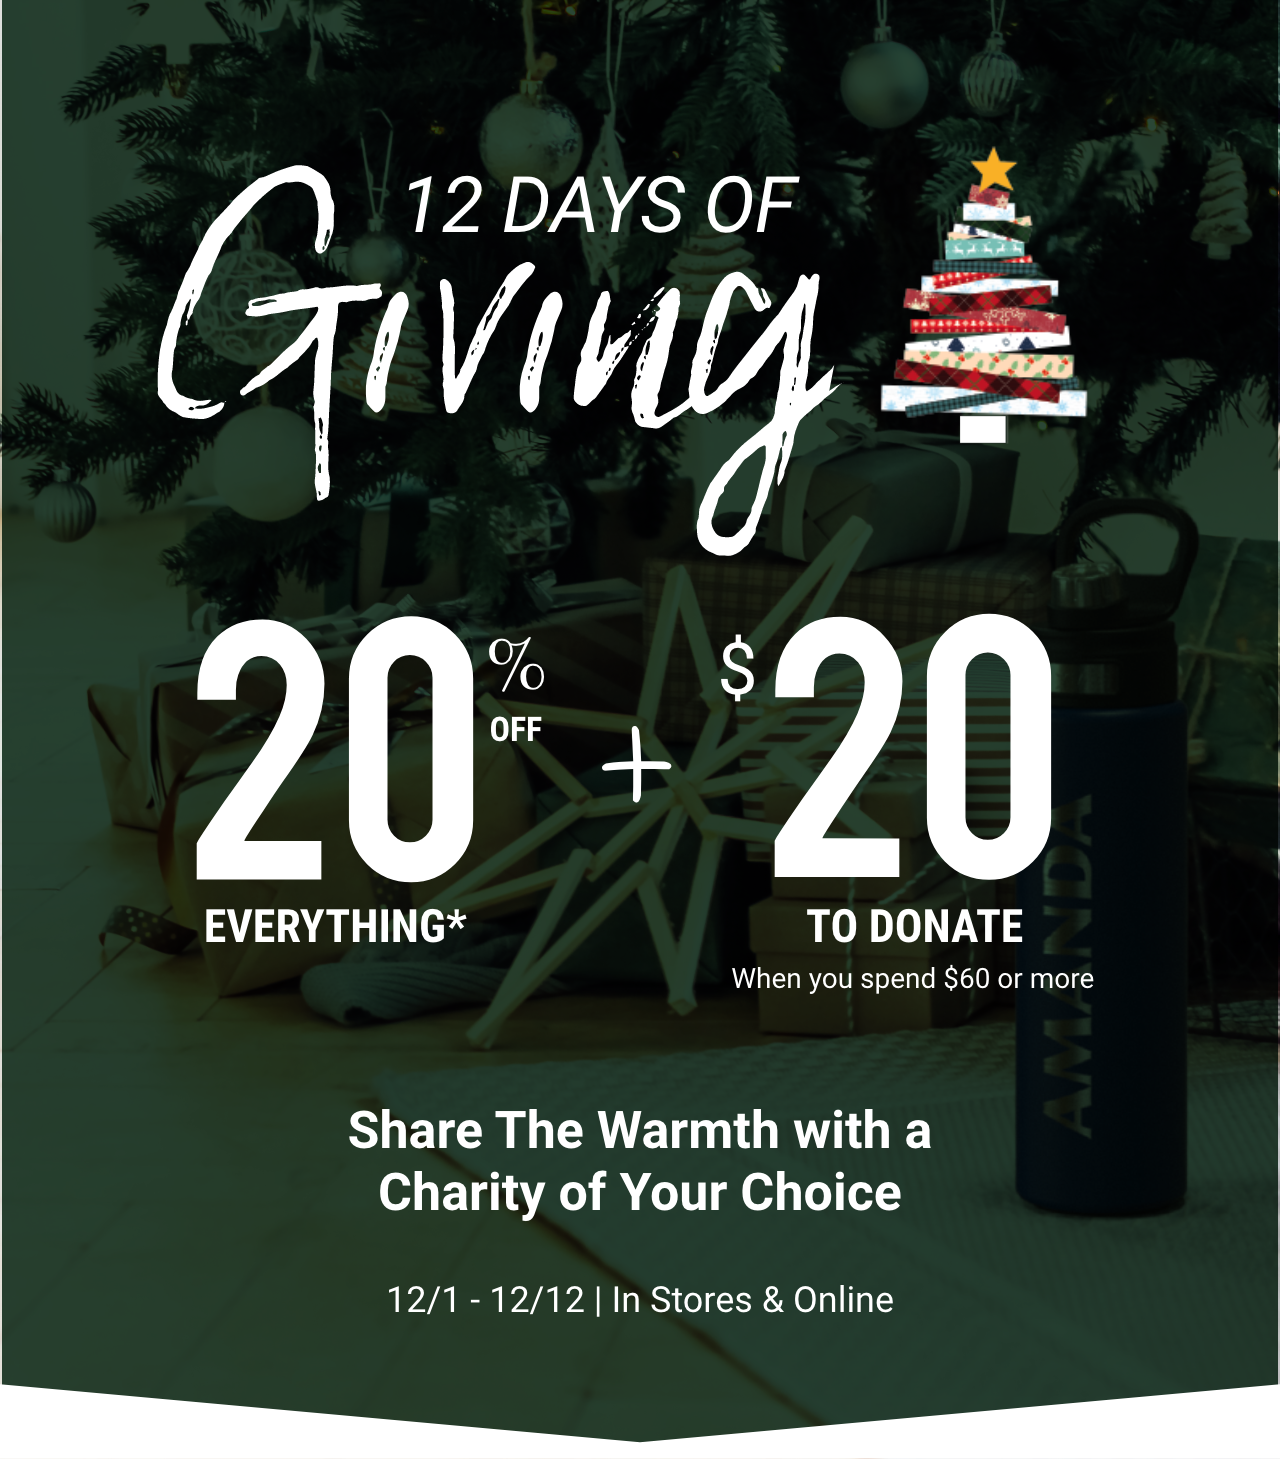 12 Days of Giving. 20% off everything plus $20 to donate when you spend $60 or more. Share the warmth with a charity of your choice from 12/1 to 12/12 in stores and online.